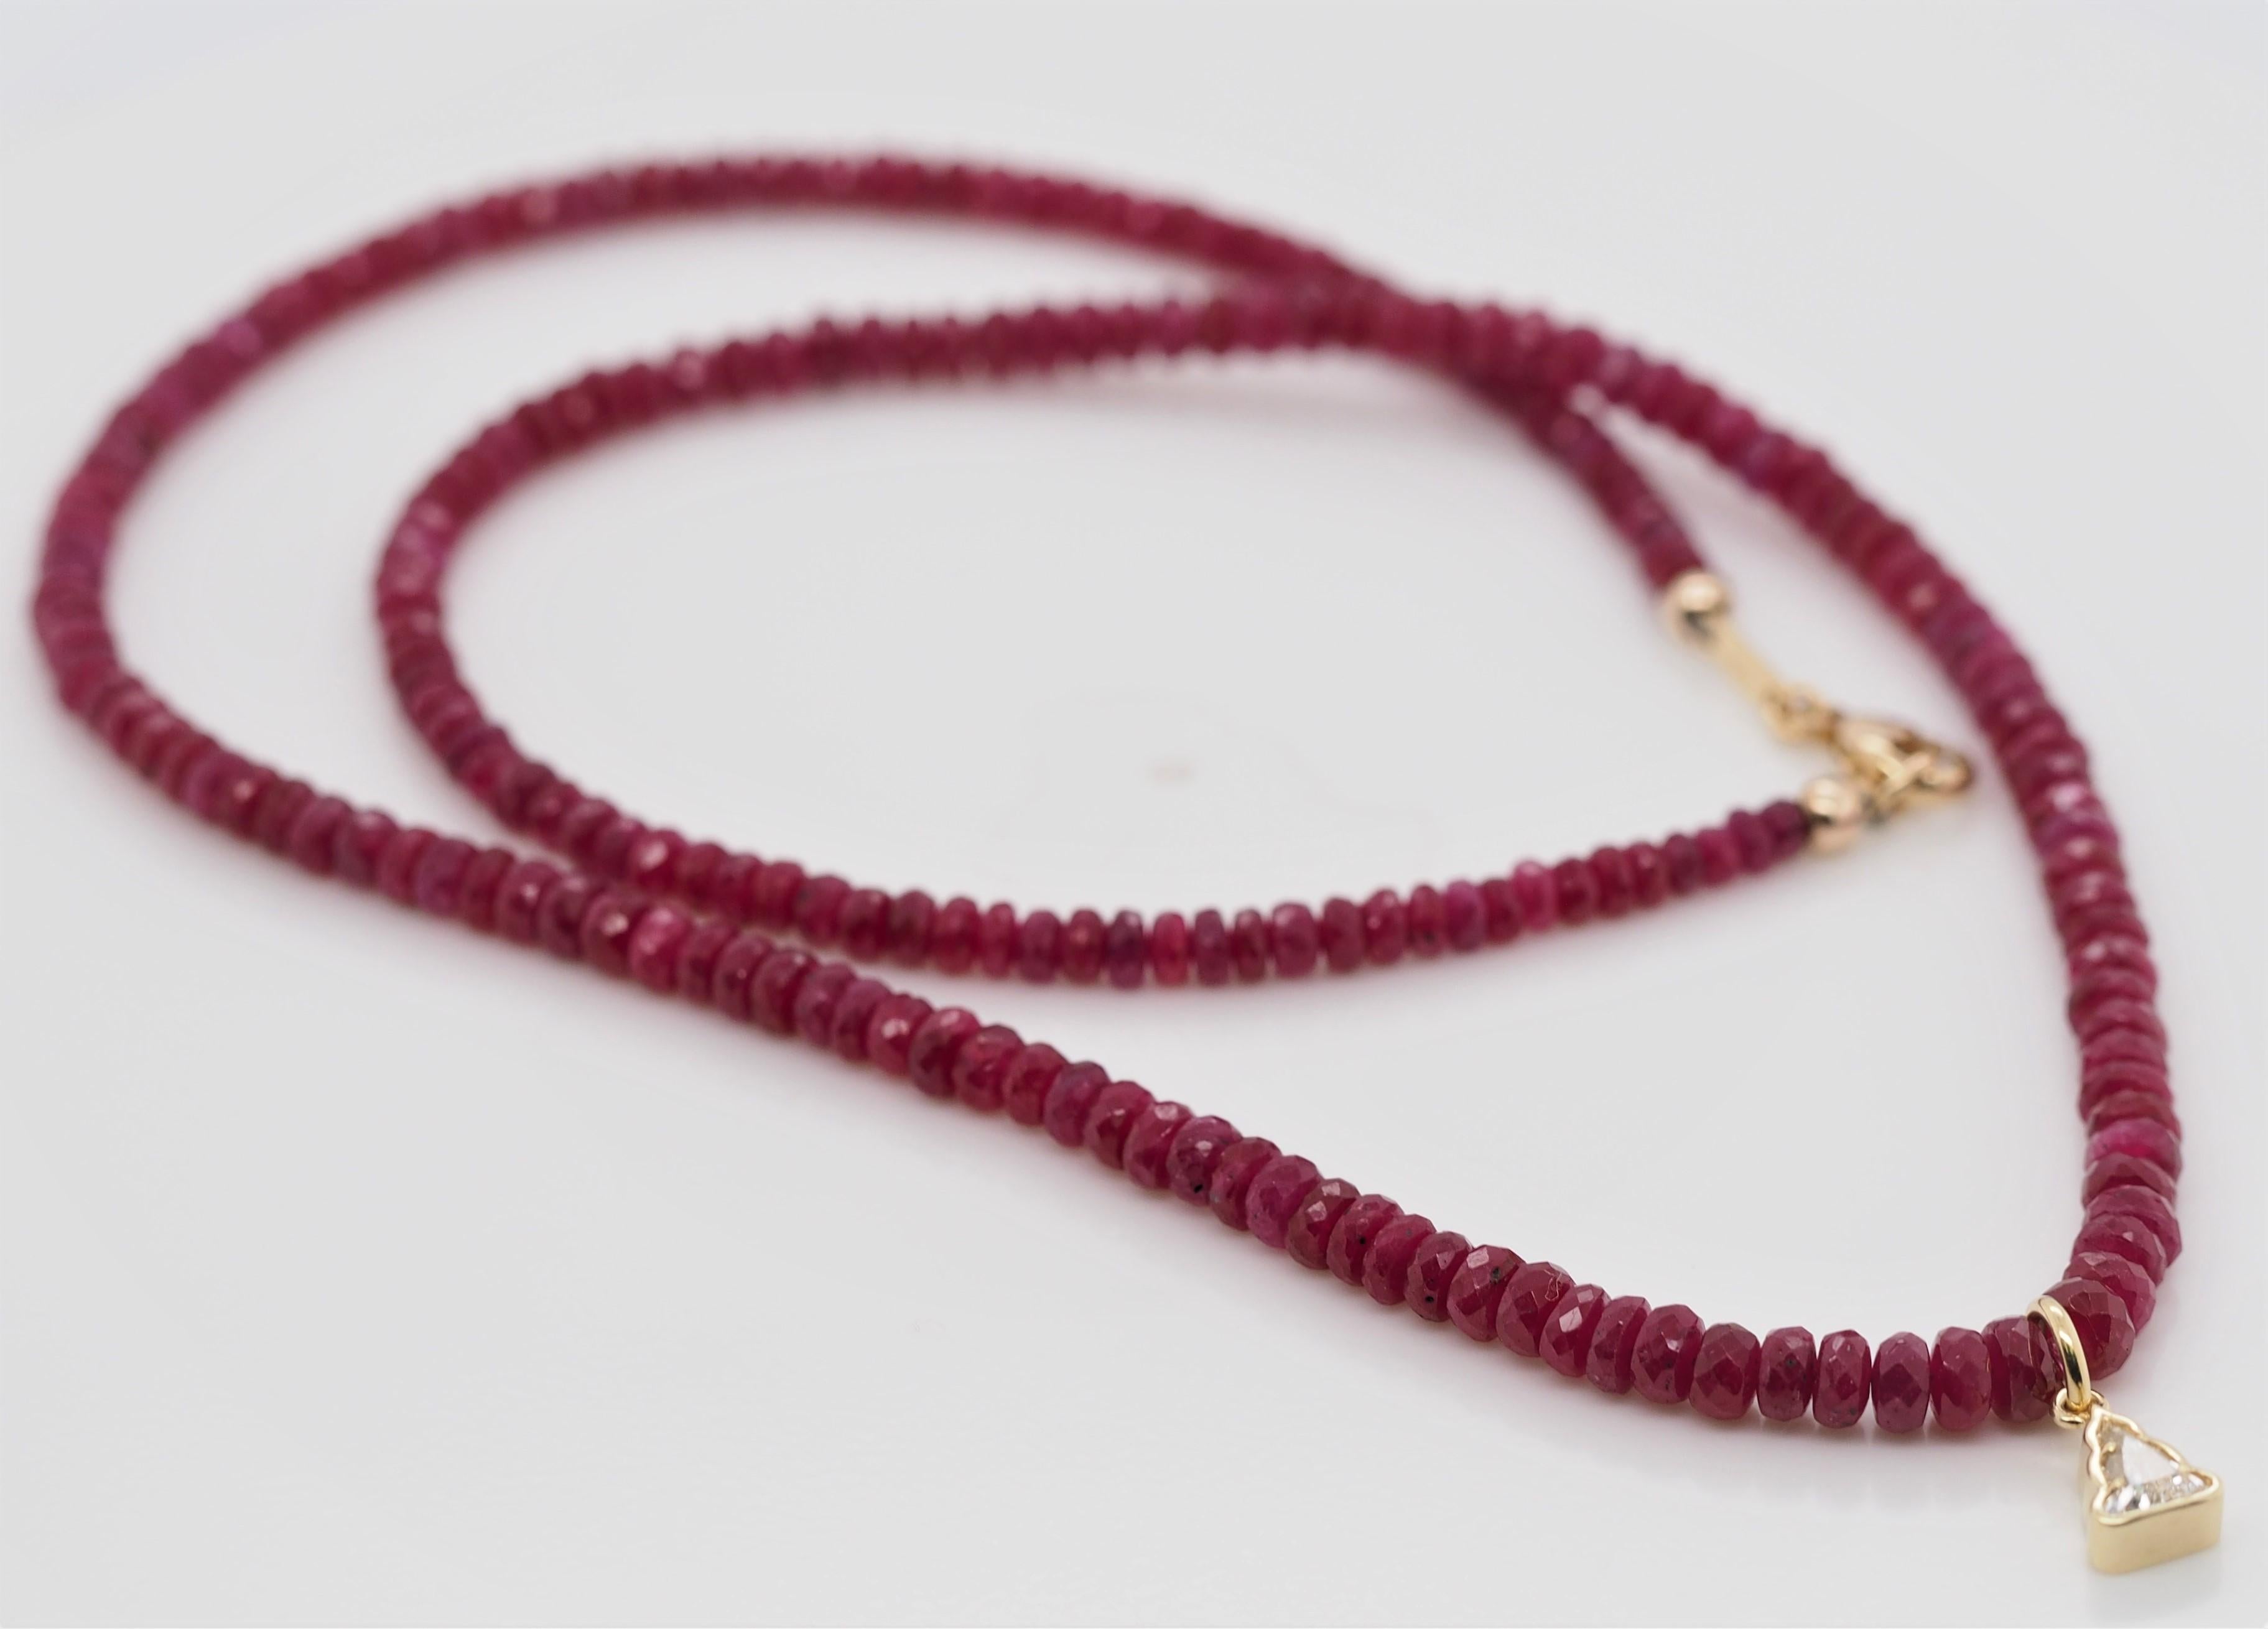 18K Yellow Gold Bezel Set 0.31 ct Diamond Buddha and Genuine Rondelle Ruby Beaded Necklace is absolutely divine. The ruby beads range in size from 3.2 mm to 4.1 mm in diameter. Every bead in the necklace is genuine ruby. The colors are very bright